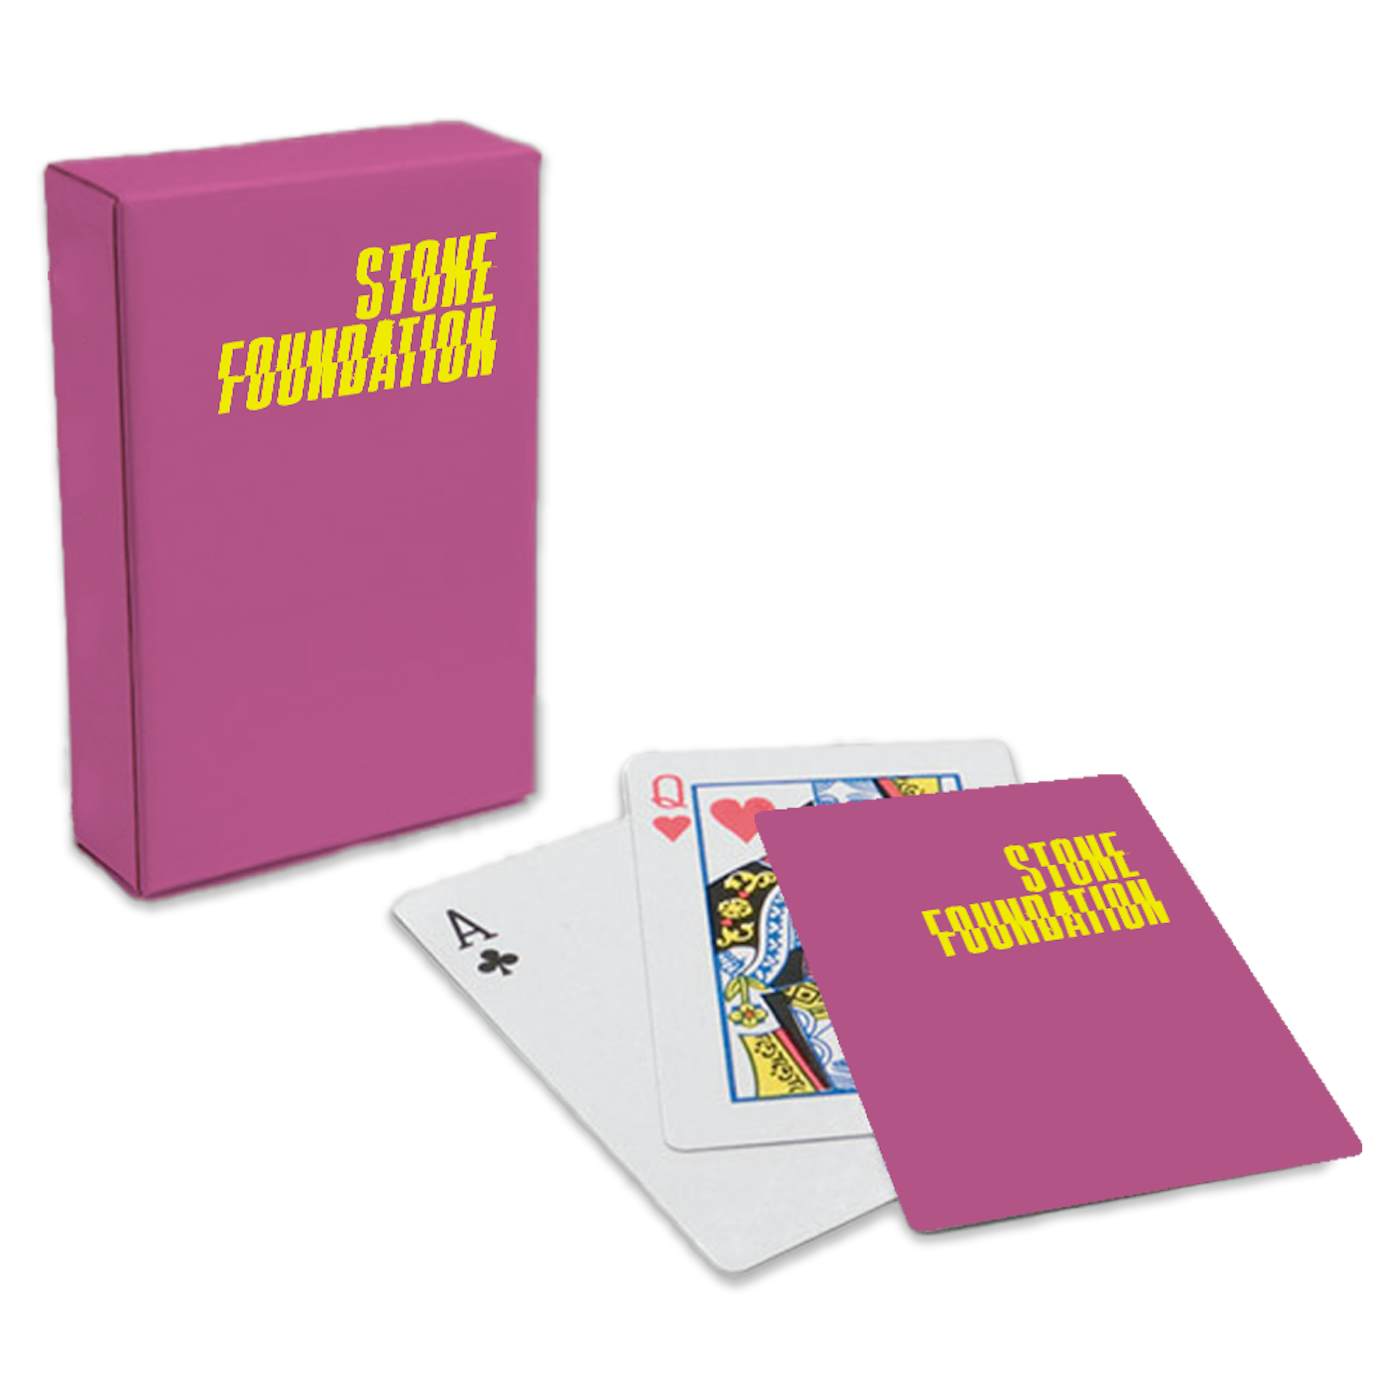 Stone Foundation Playing Cards